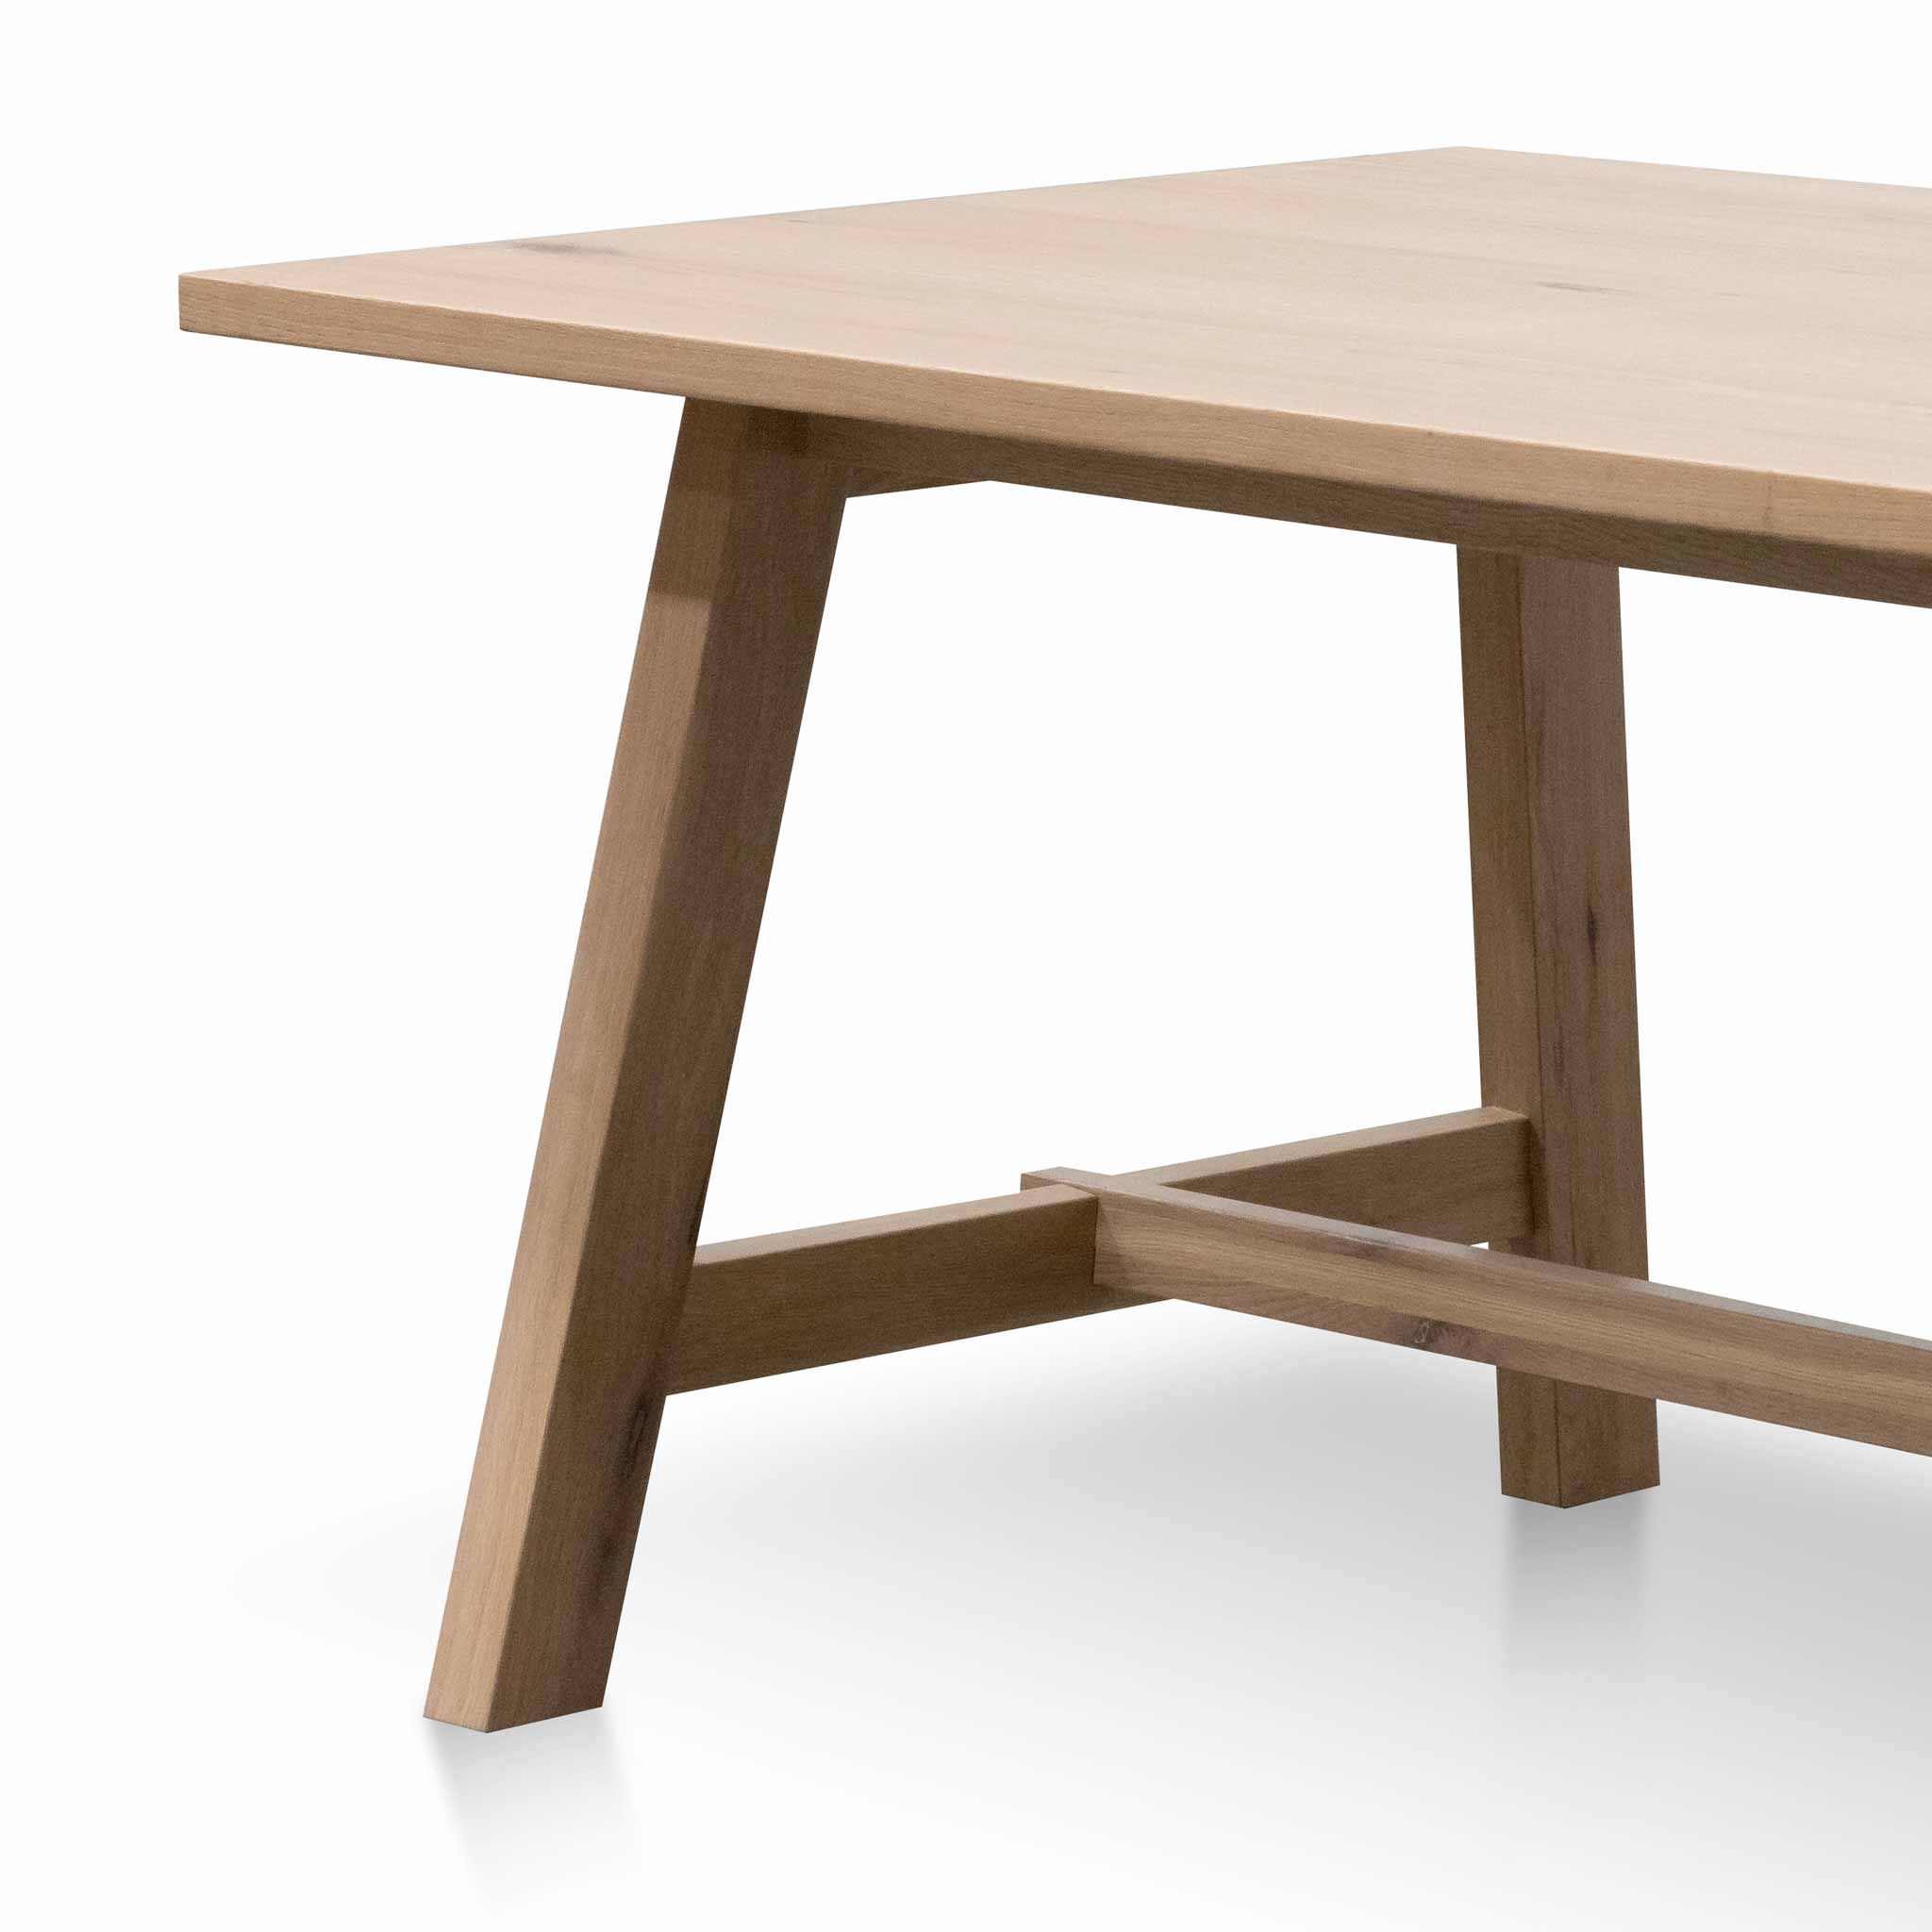 Quail 2.2m Wooden Dining Table - Washed Natural - Dining Tables